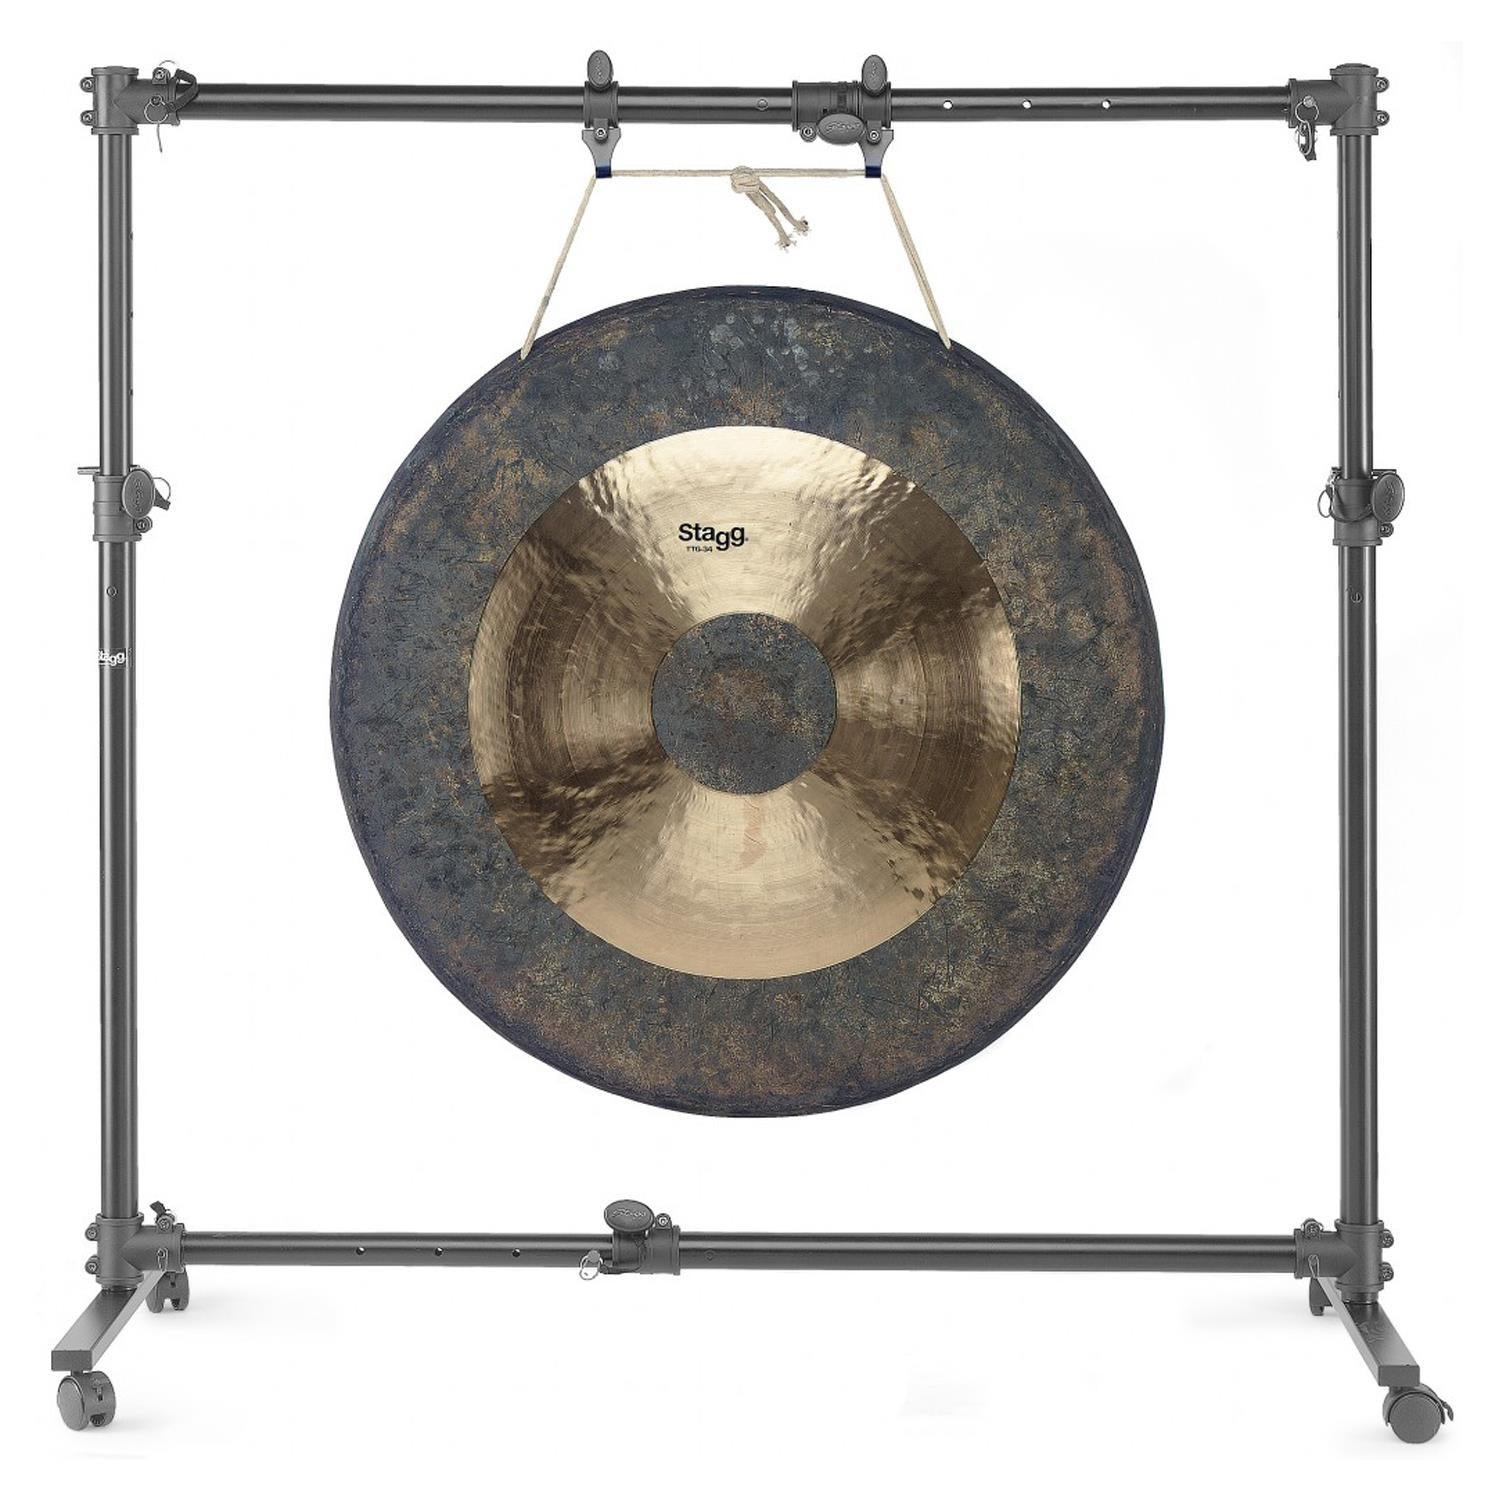 Stagg GOS-1538 Adjustable Large Gong Stand with Wheels - DY Pro Audio